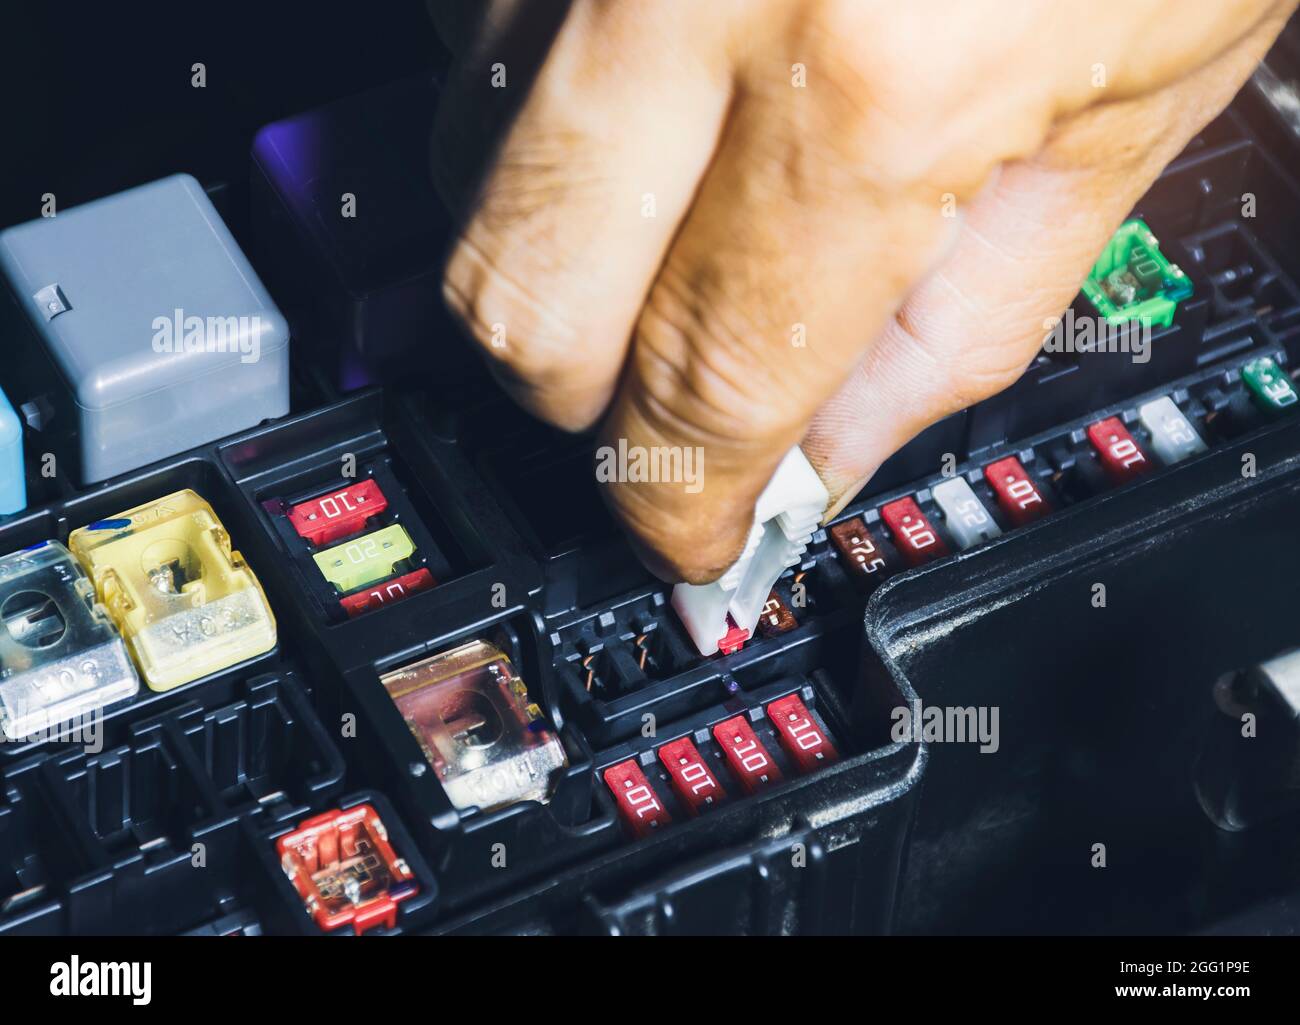 Mechanic replaces the spare fuse to the car fuse box with the fuse clip tool Stock Photo